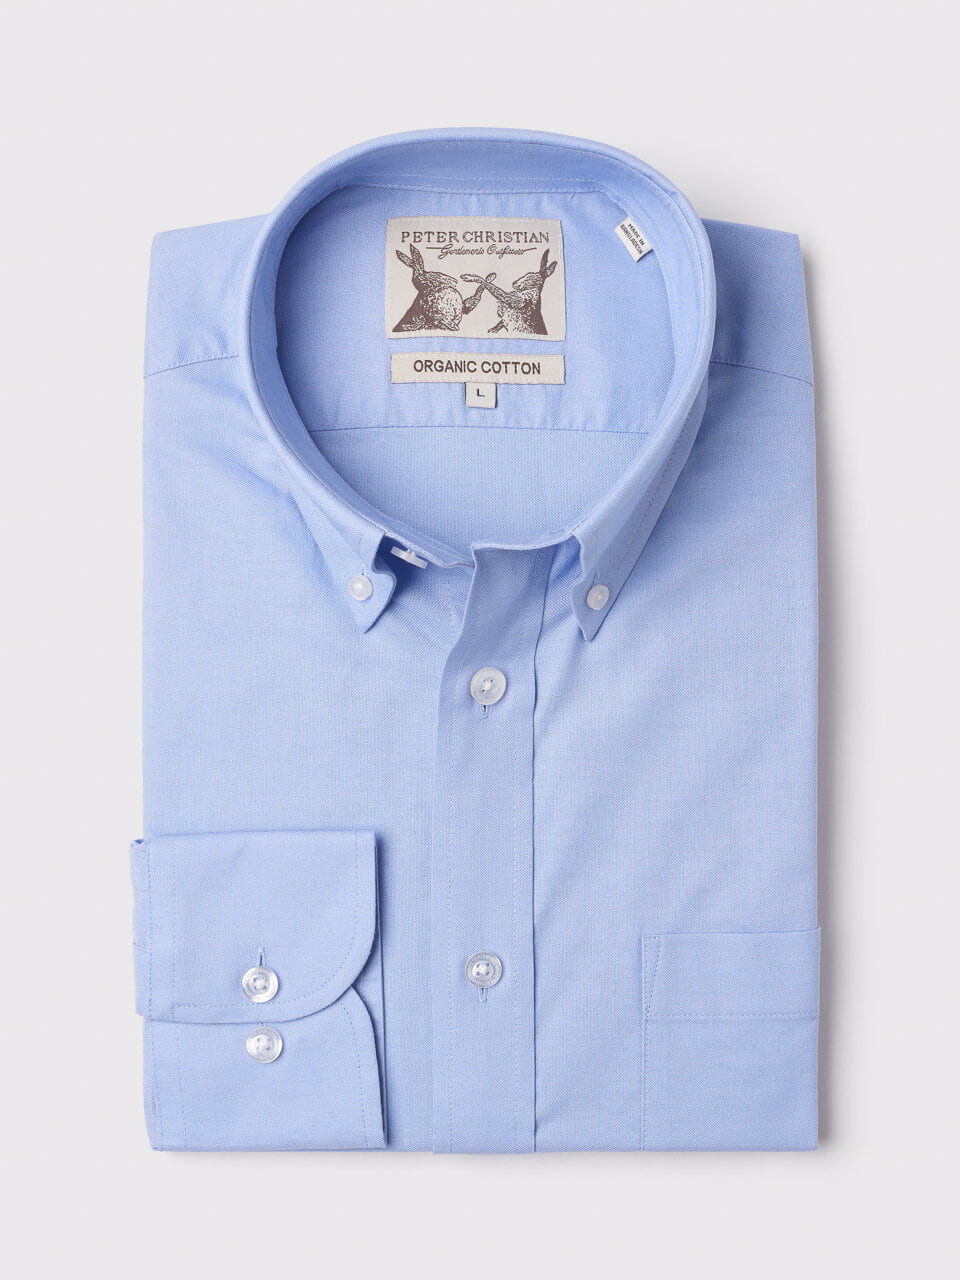 Best Oxford Cloth Button-Down Shirt Guide: Read Before You Buy